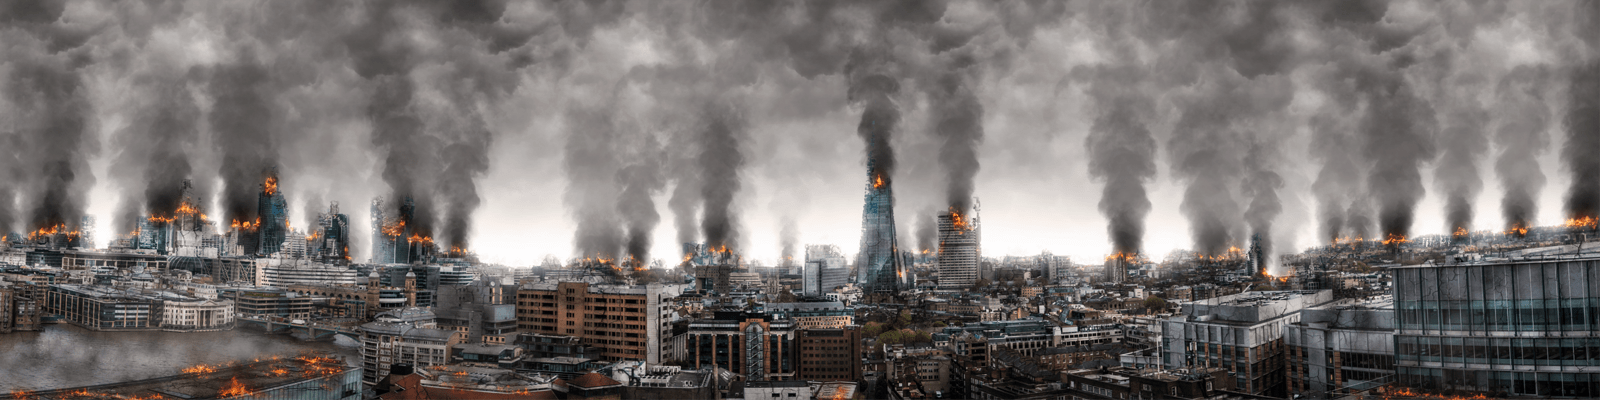 Burning buildings in a post-apocalyptic world